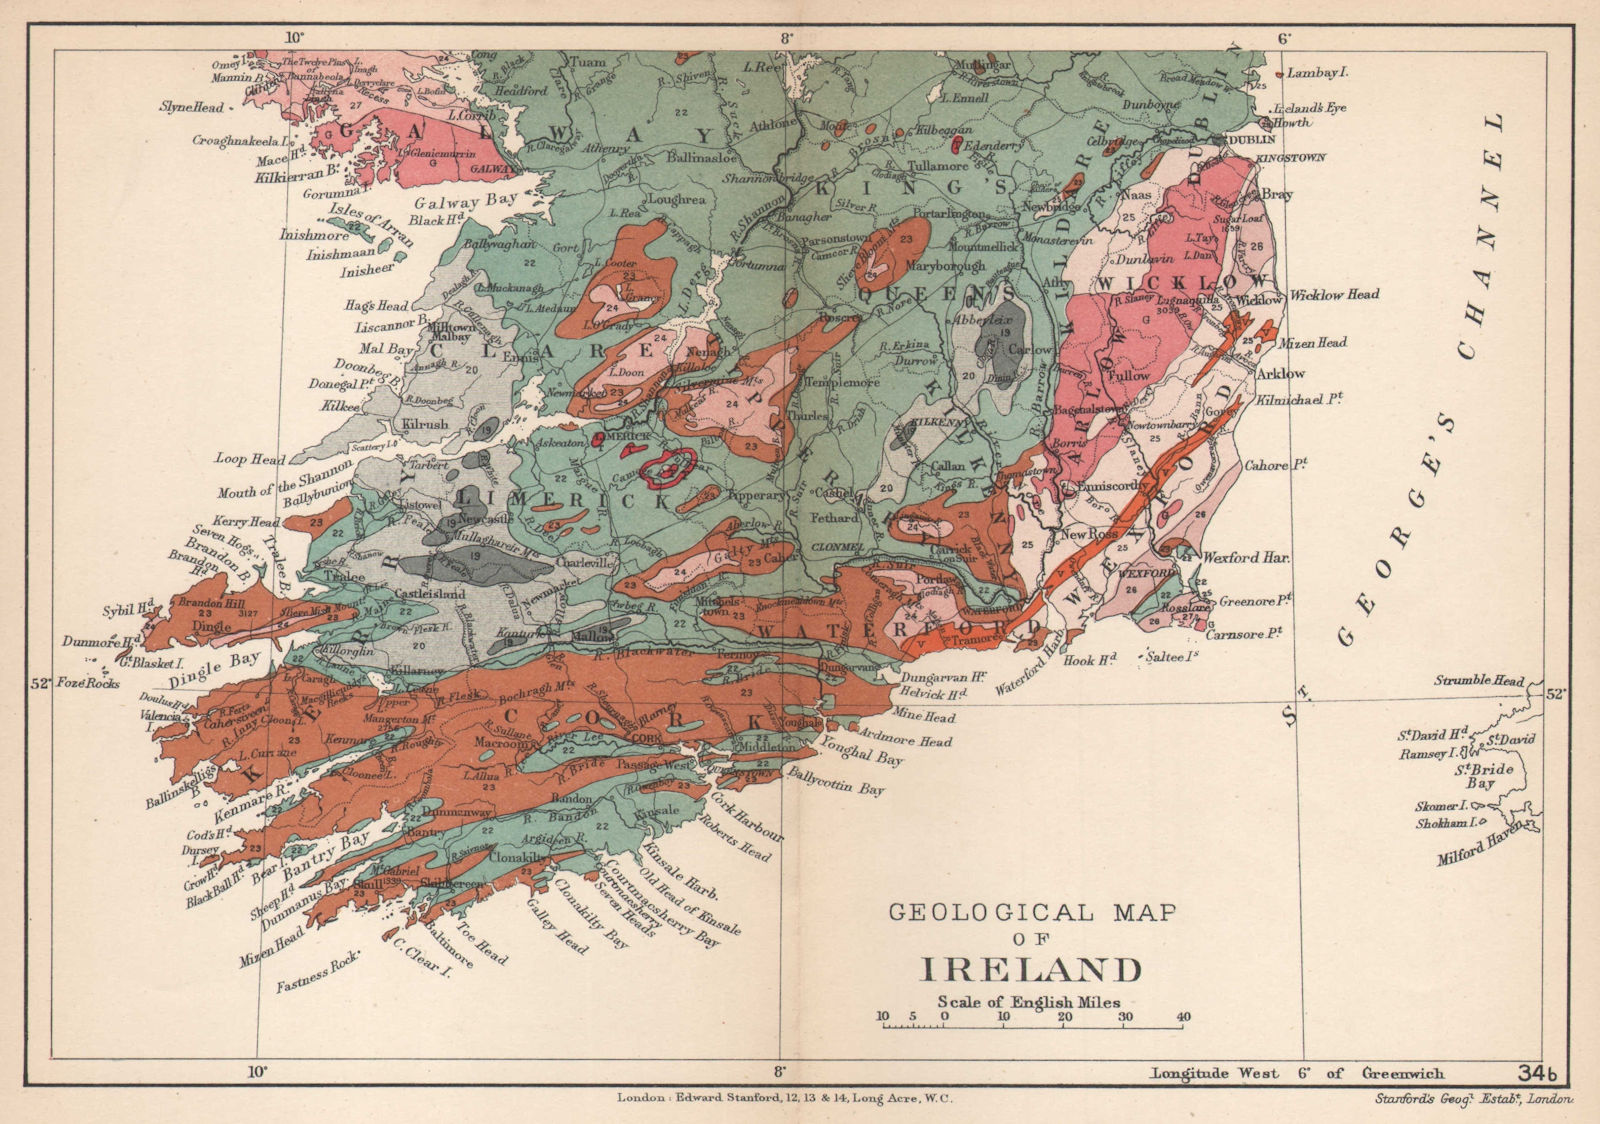 Associate Product SOUTHERN IRELAND Geological map. STANFORD 1907 old antique plan chart